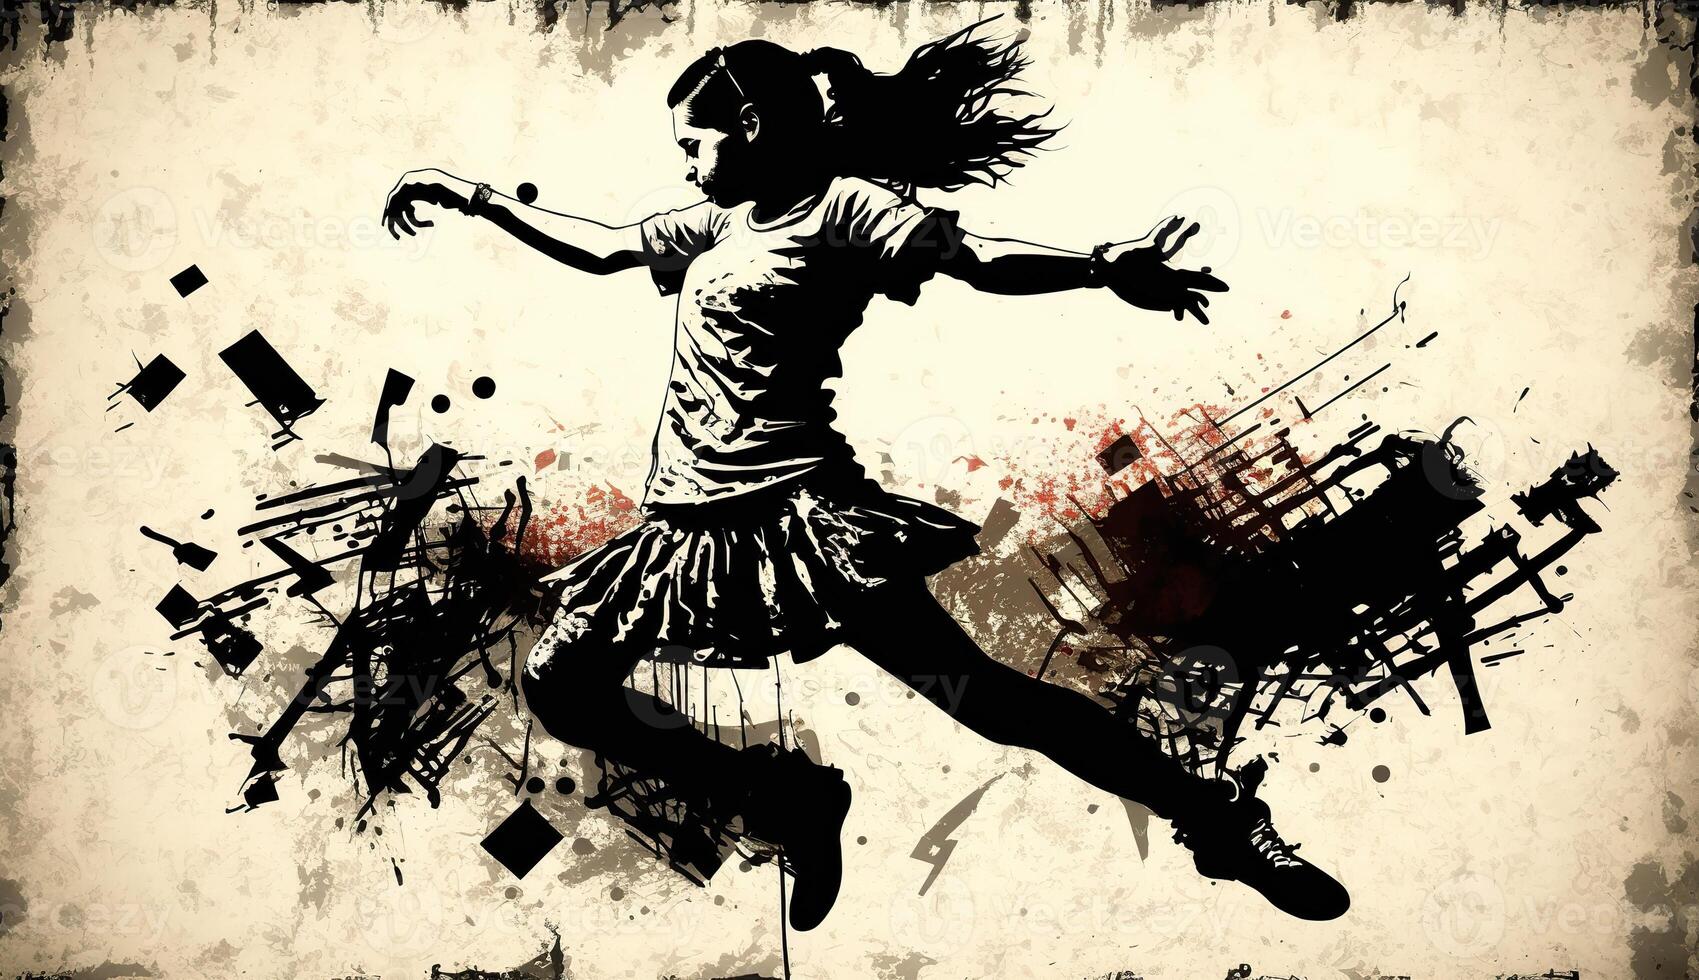 . . Street art graffiti of dancing person music rhythm. Inspired by Banksy underground culture. Graphic Art photo